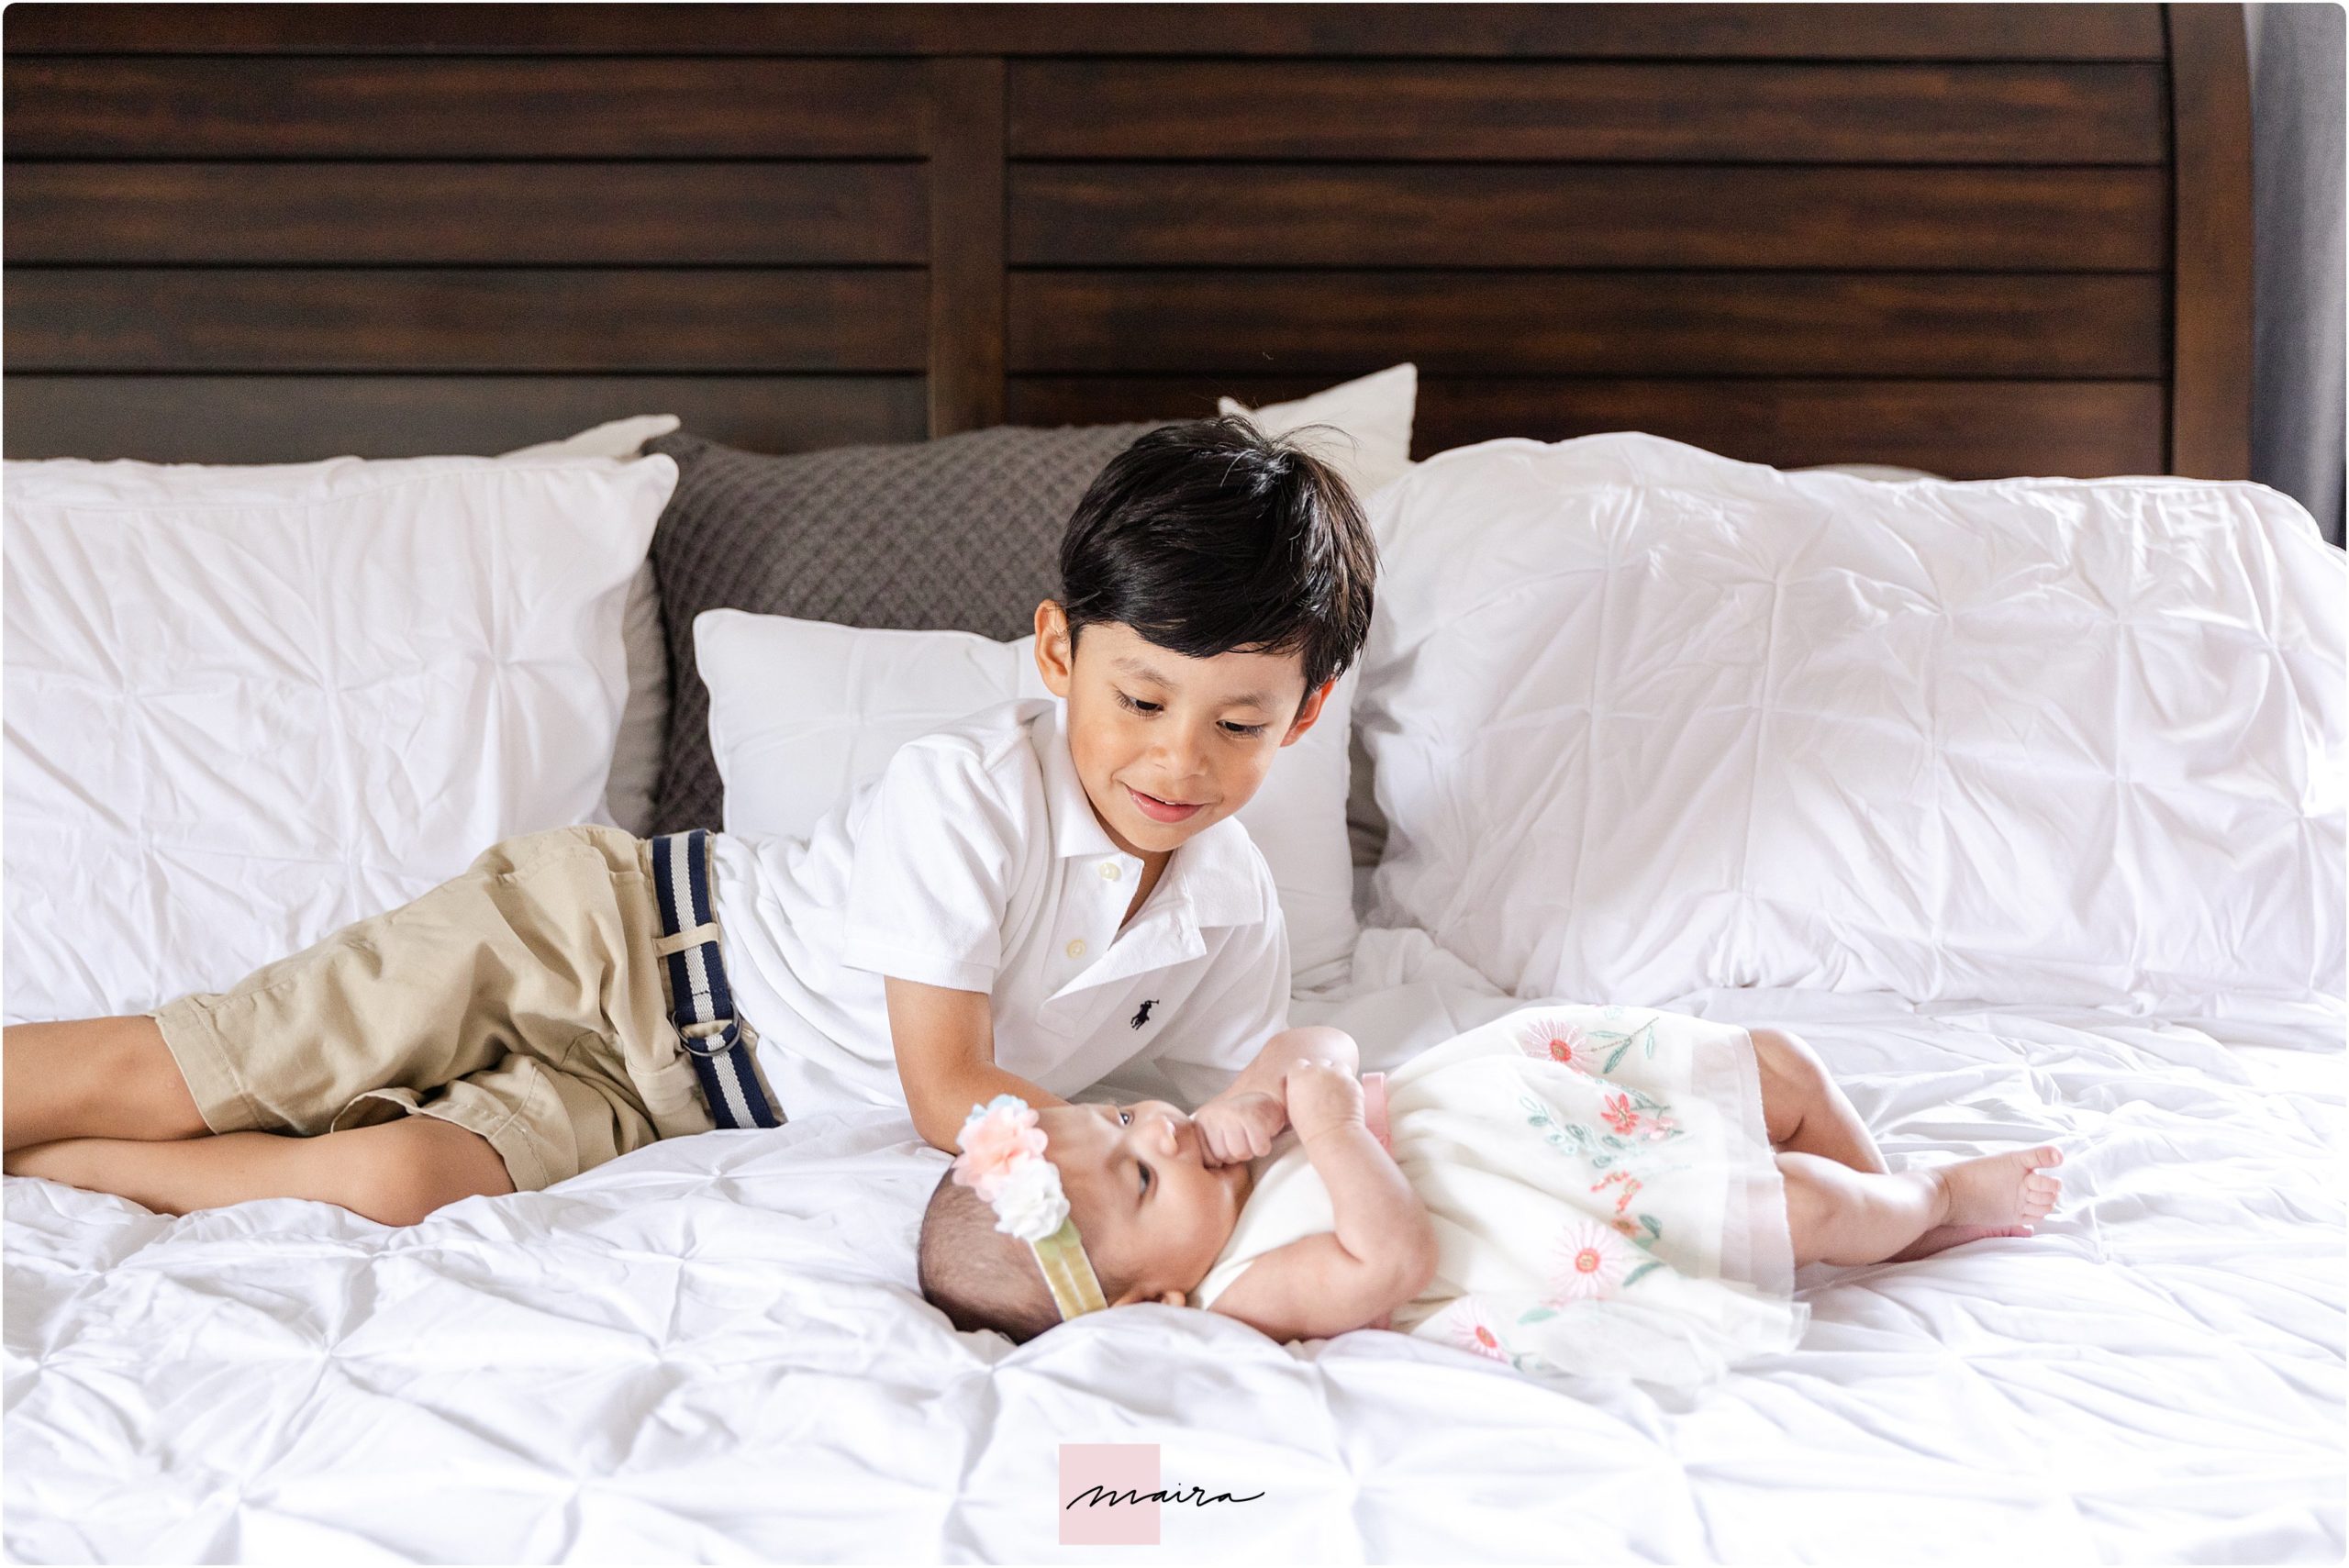 Newborn Home Session, Home Family Session, Baby arrival, Big brother and little sister, Beautiful Latino Family, Welcome home baby, Baby, Brother, Family Session at home, Home, Family